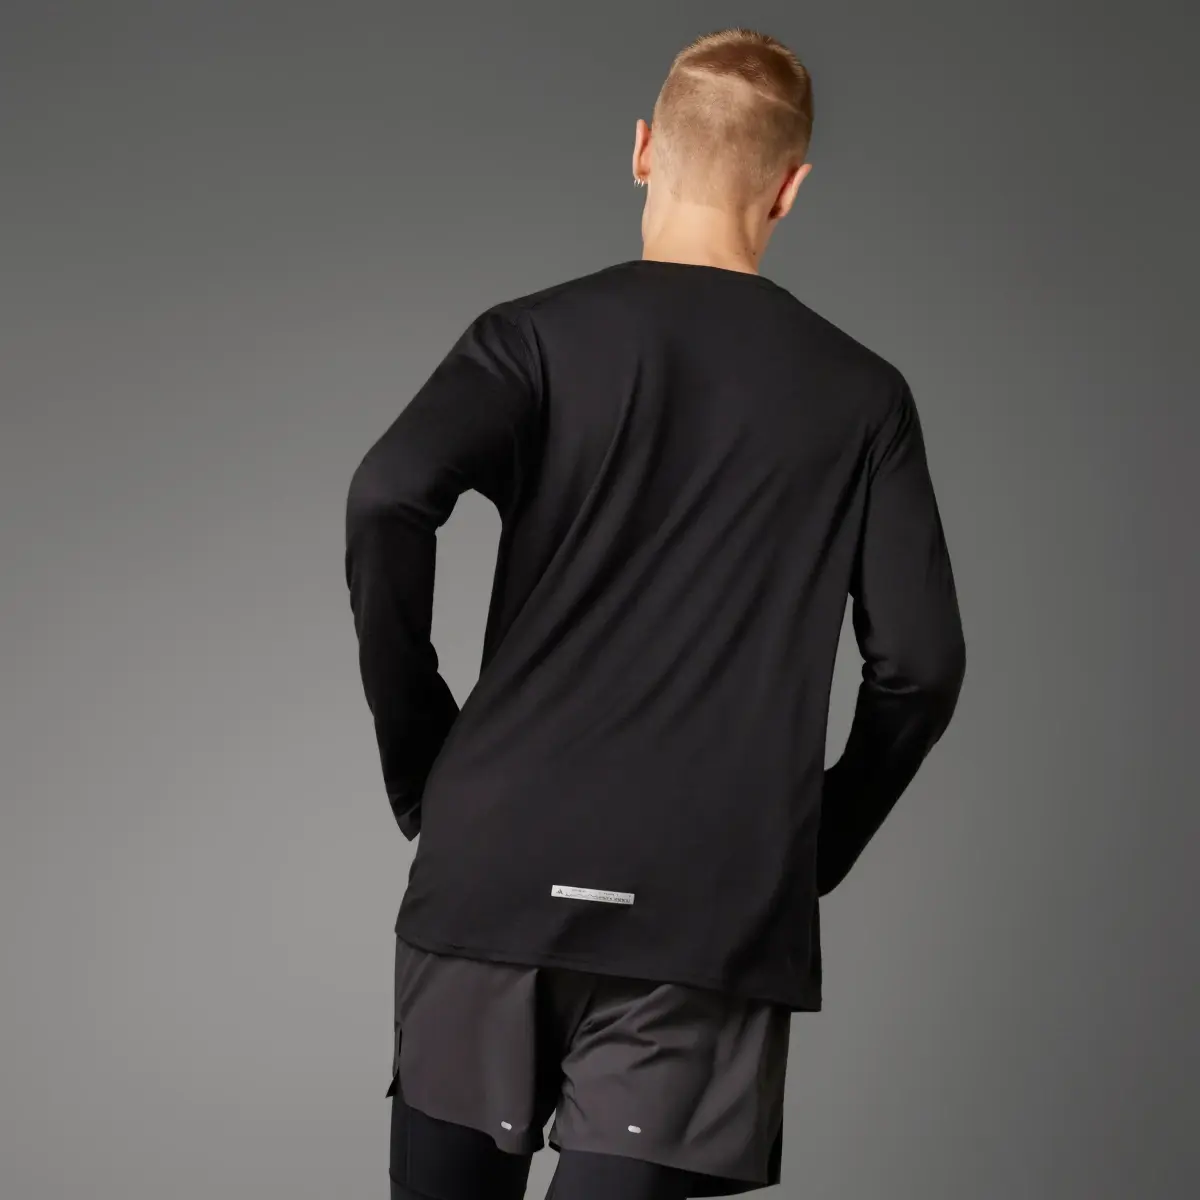 Adidas Ultimate Running Conquer the Elements Merino Long Sleeve Long-sleeve Top. 2